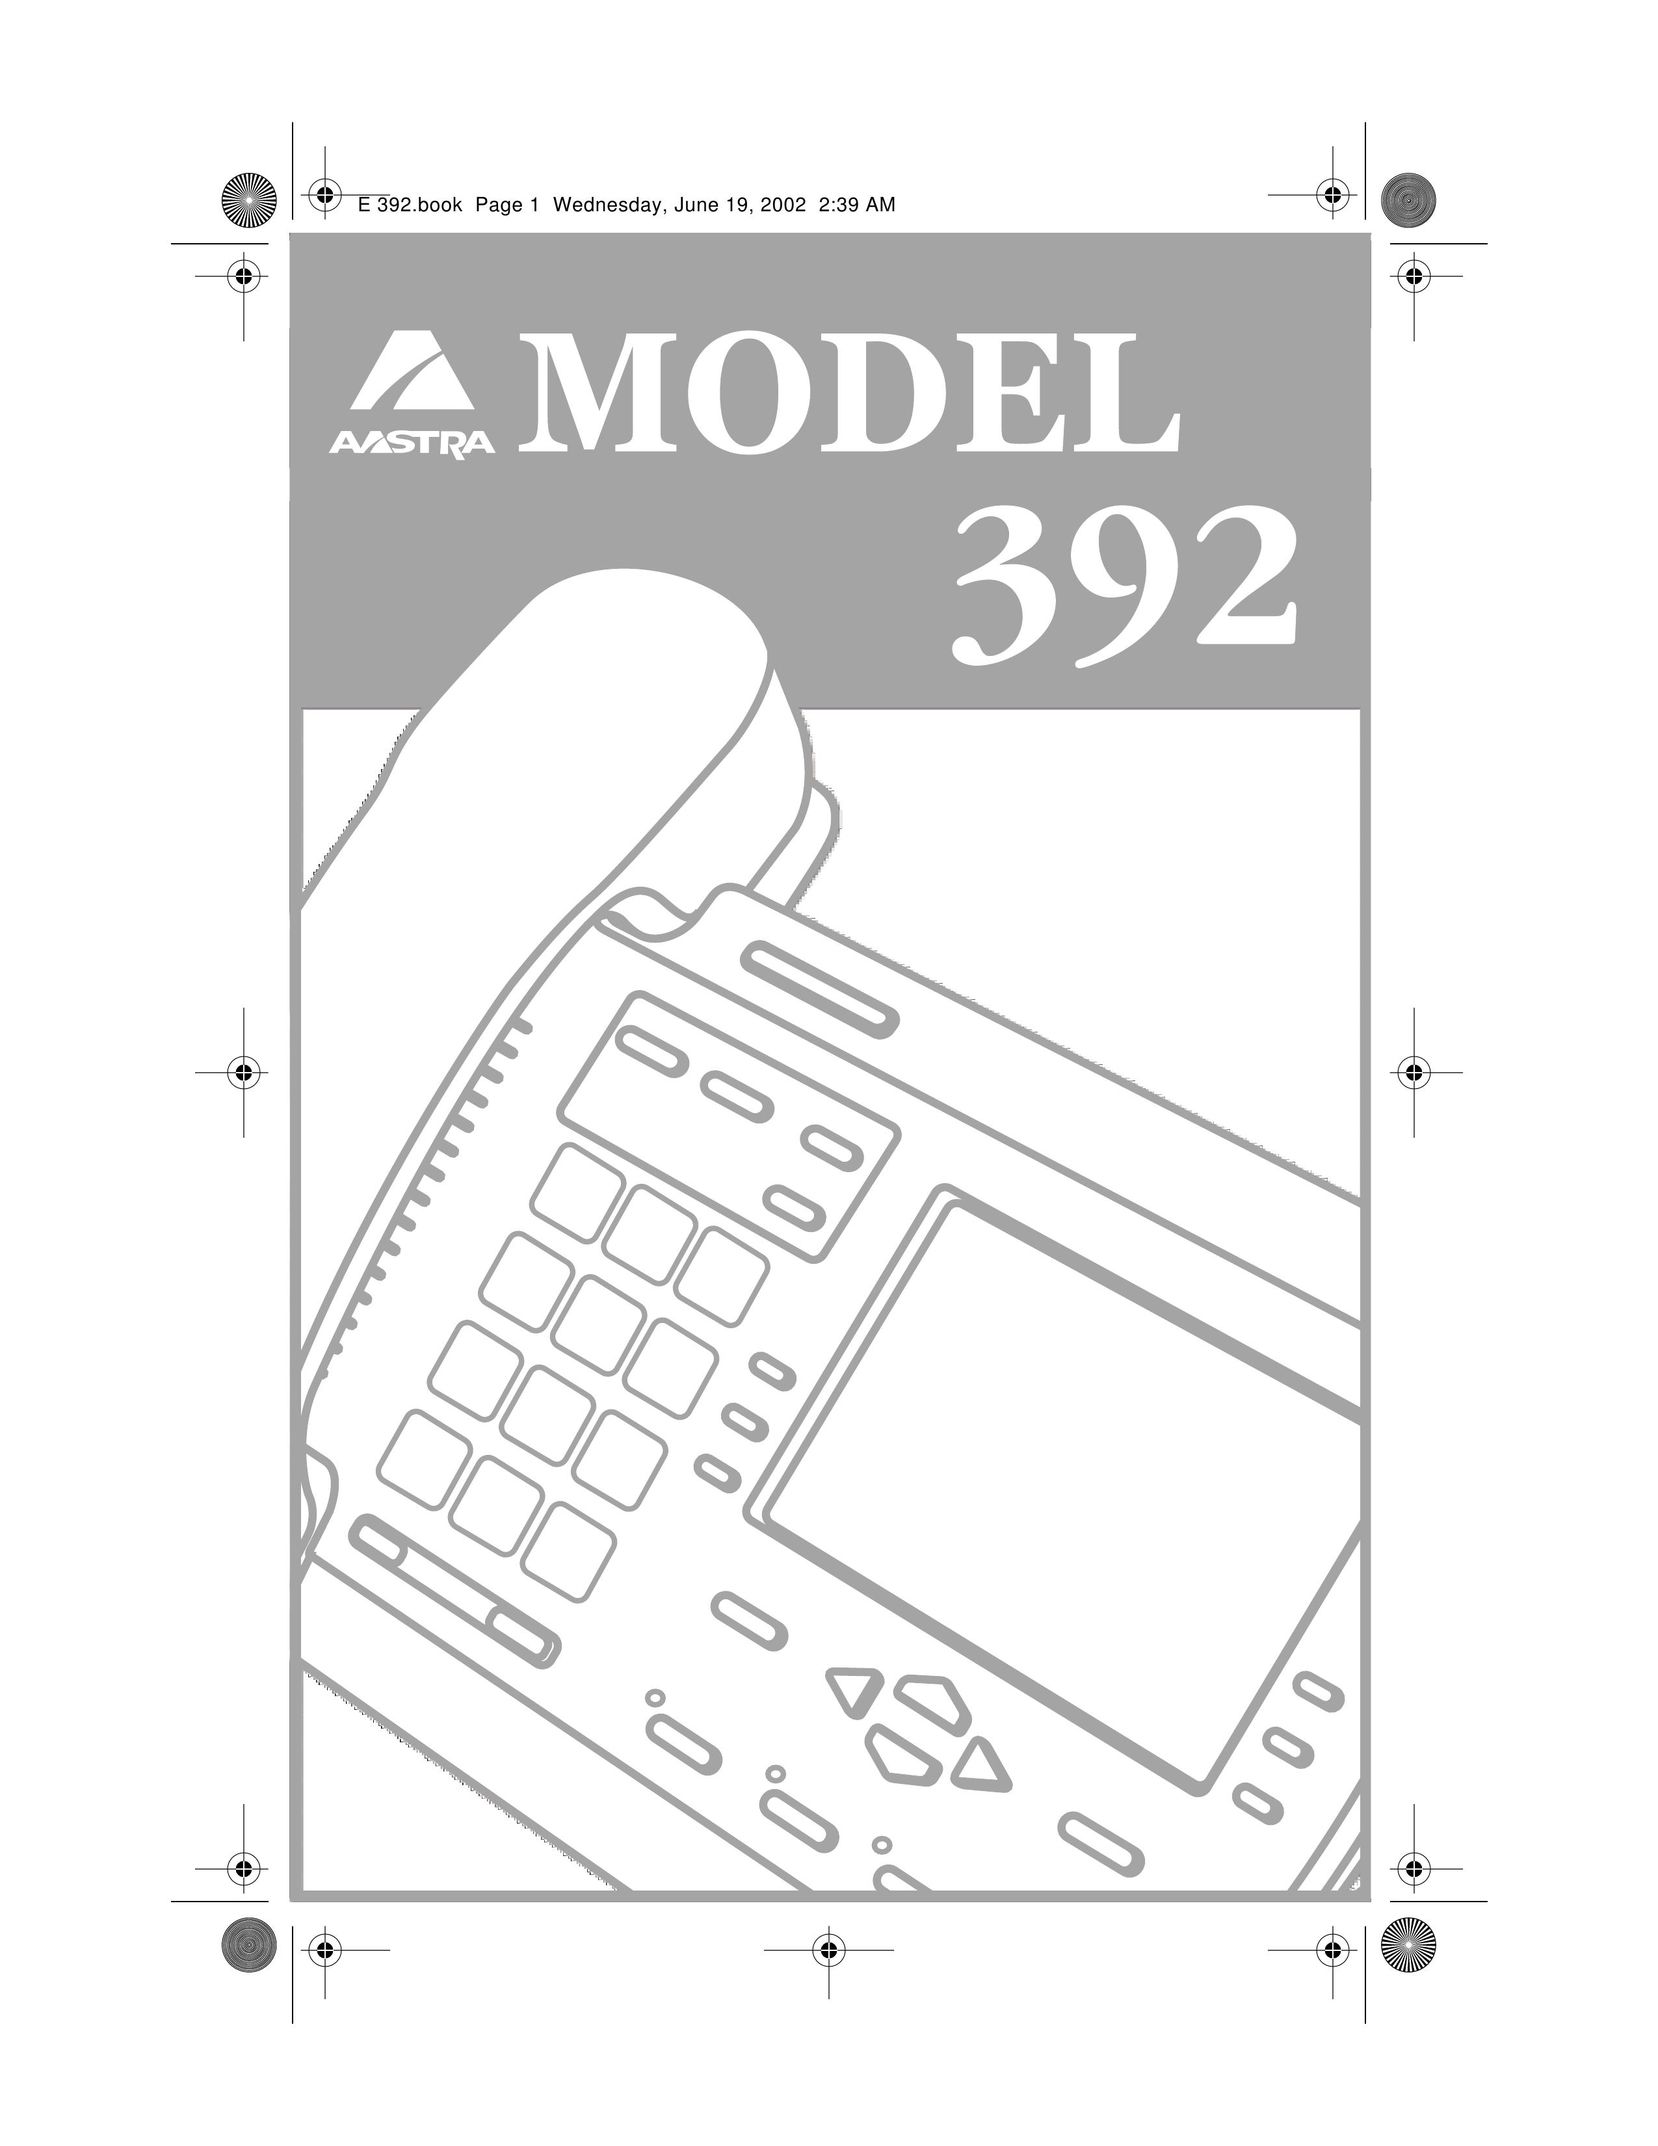 Aastra Telecom 392 Conference Phone User Manual